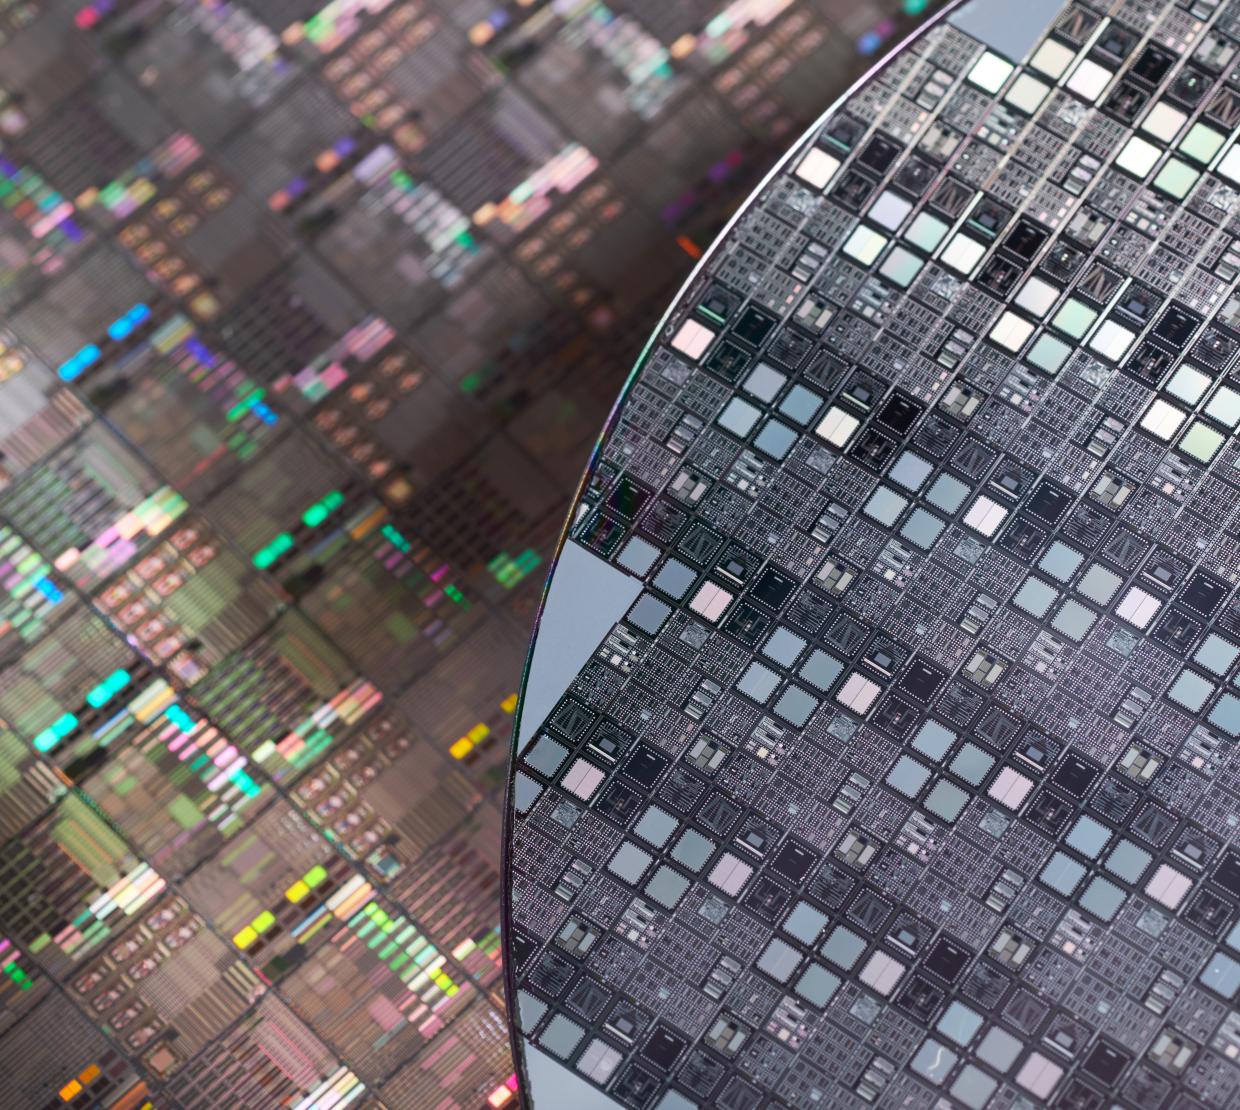 Macro image of Silicon wafers